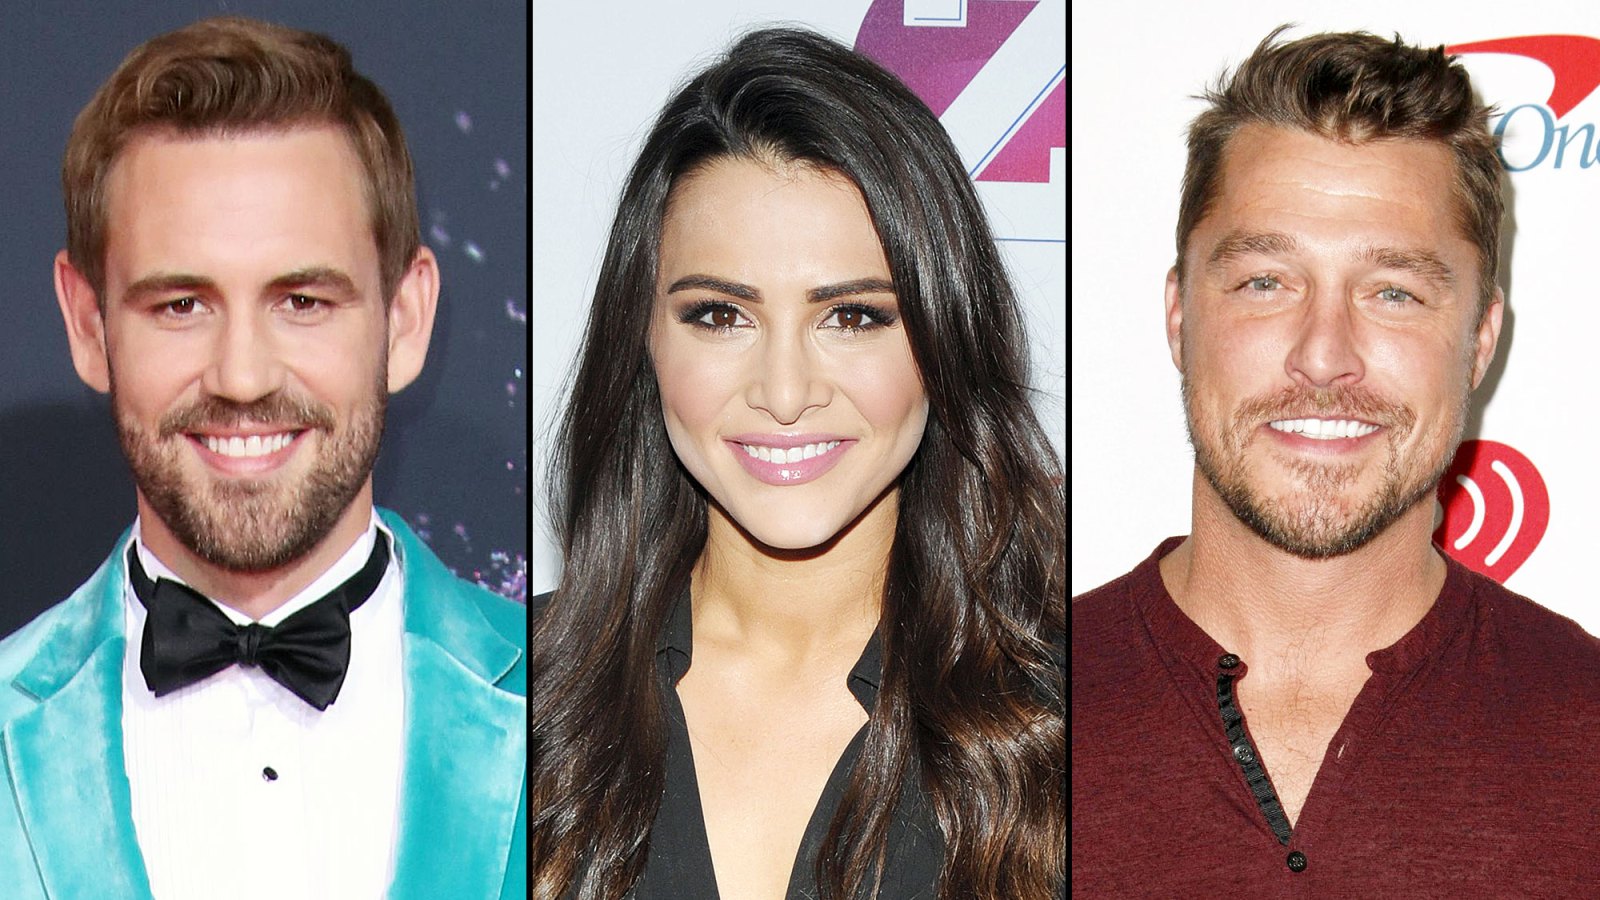 Andi Dorfman Jokes About Texting Her Bachelor Nation Exes Nick Viall and Chris Soules